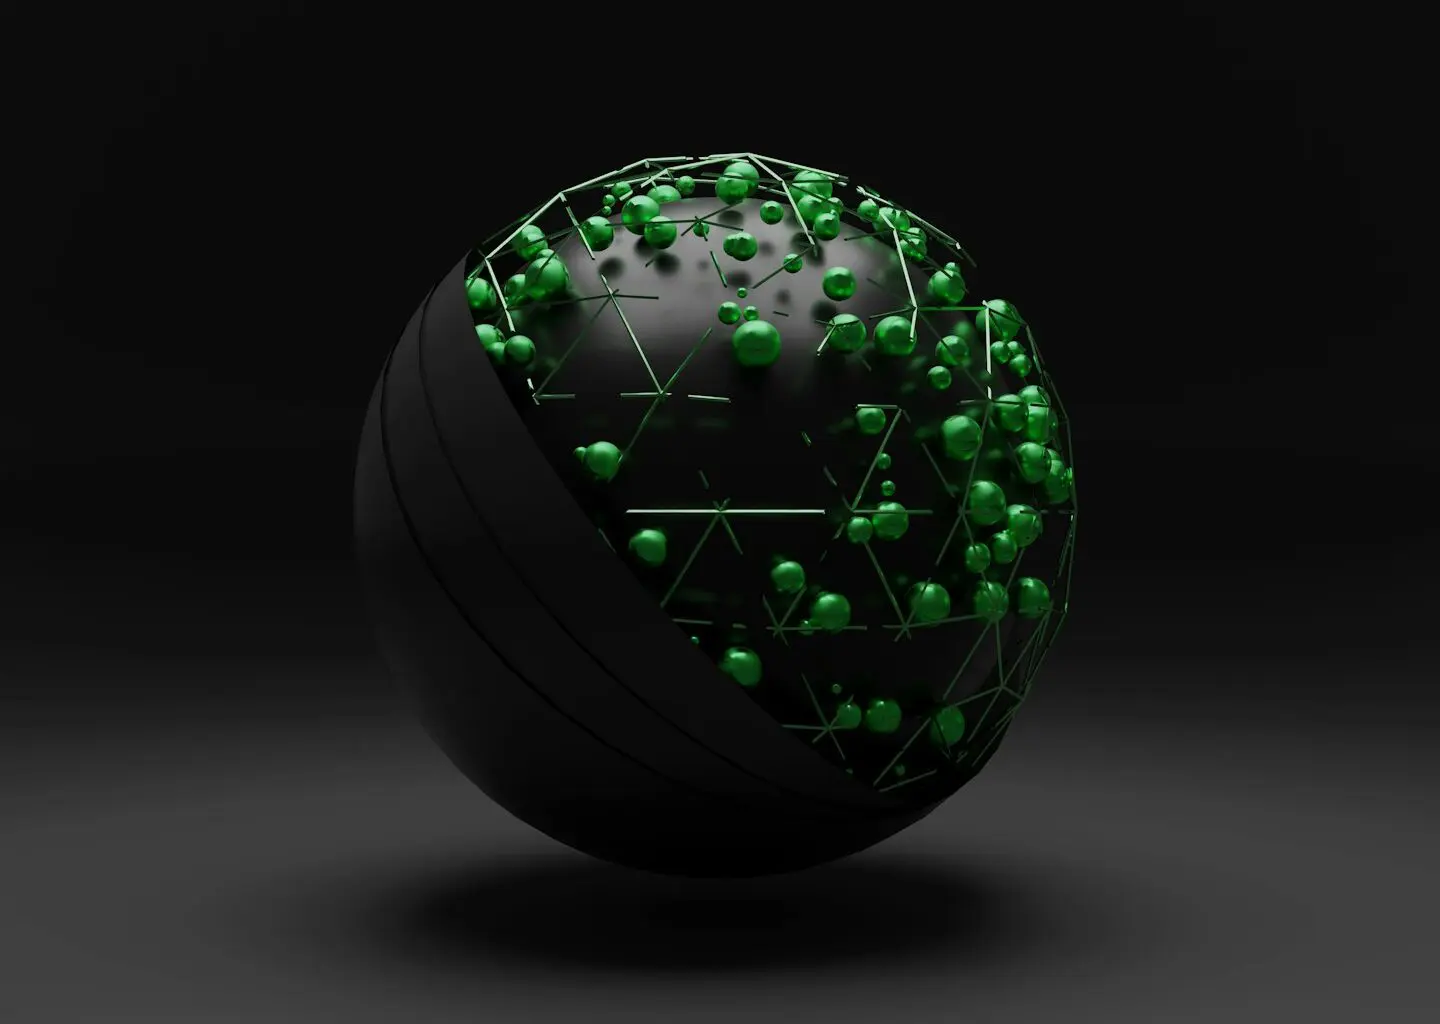 GPT A black spherical object representing the Tor network with interconnected green nodes, on a dark background.